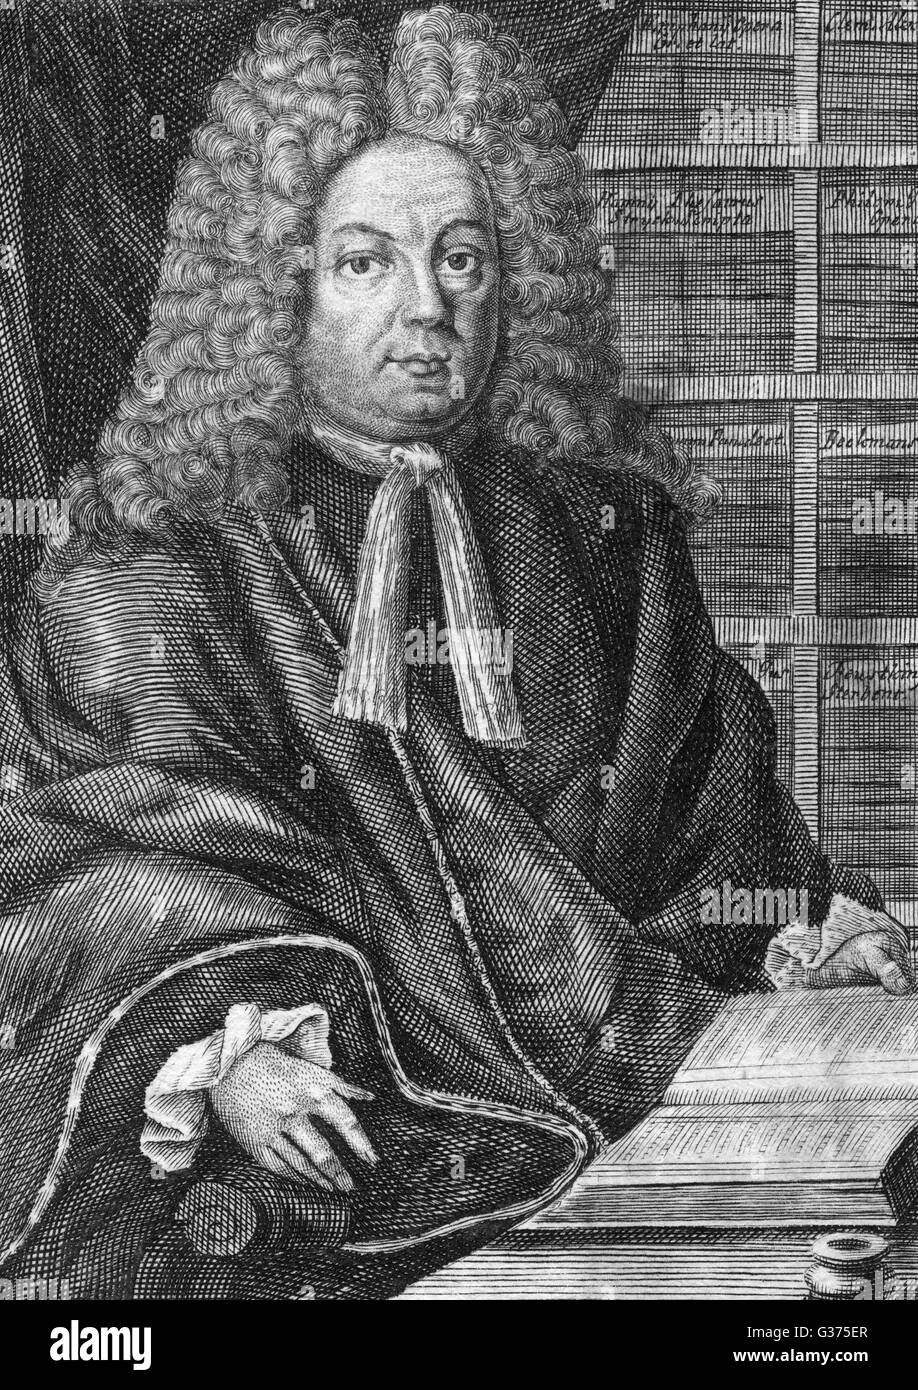 GOTTFRIED ZIMMERMANN German bookseller of  Wittenberg, depicted in his  shop surrounded by books.       Date: 1670 - 1723 Stock Photo